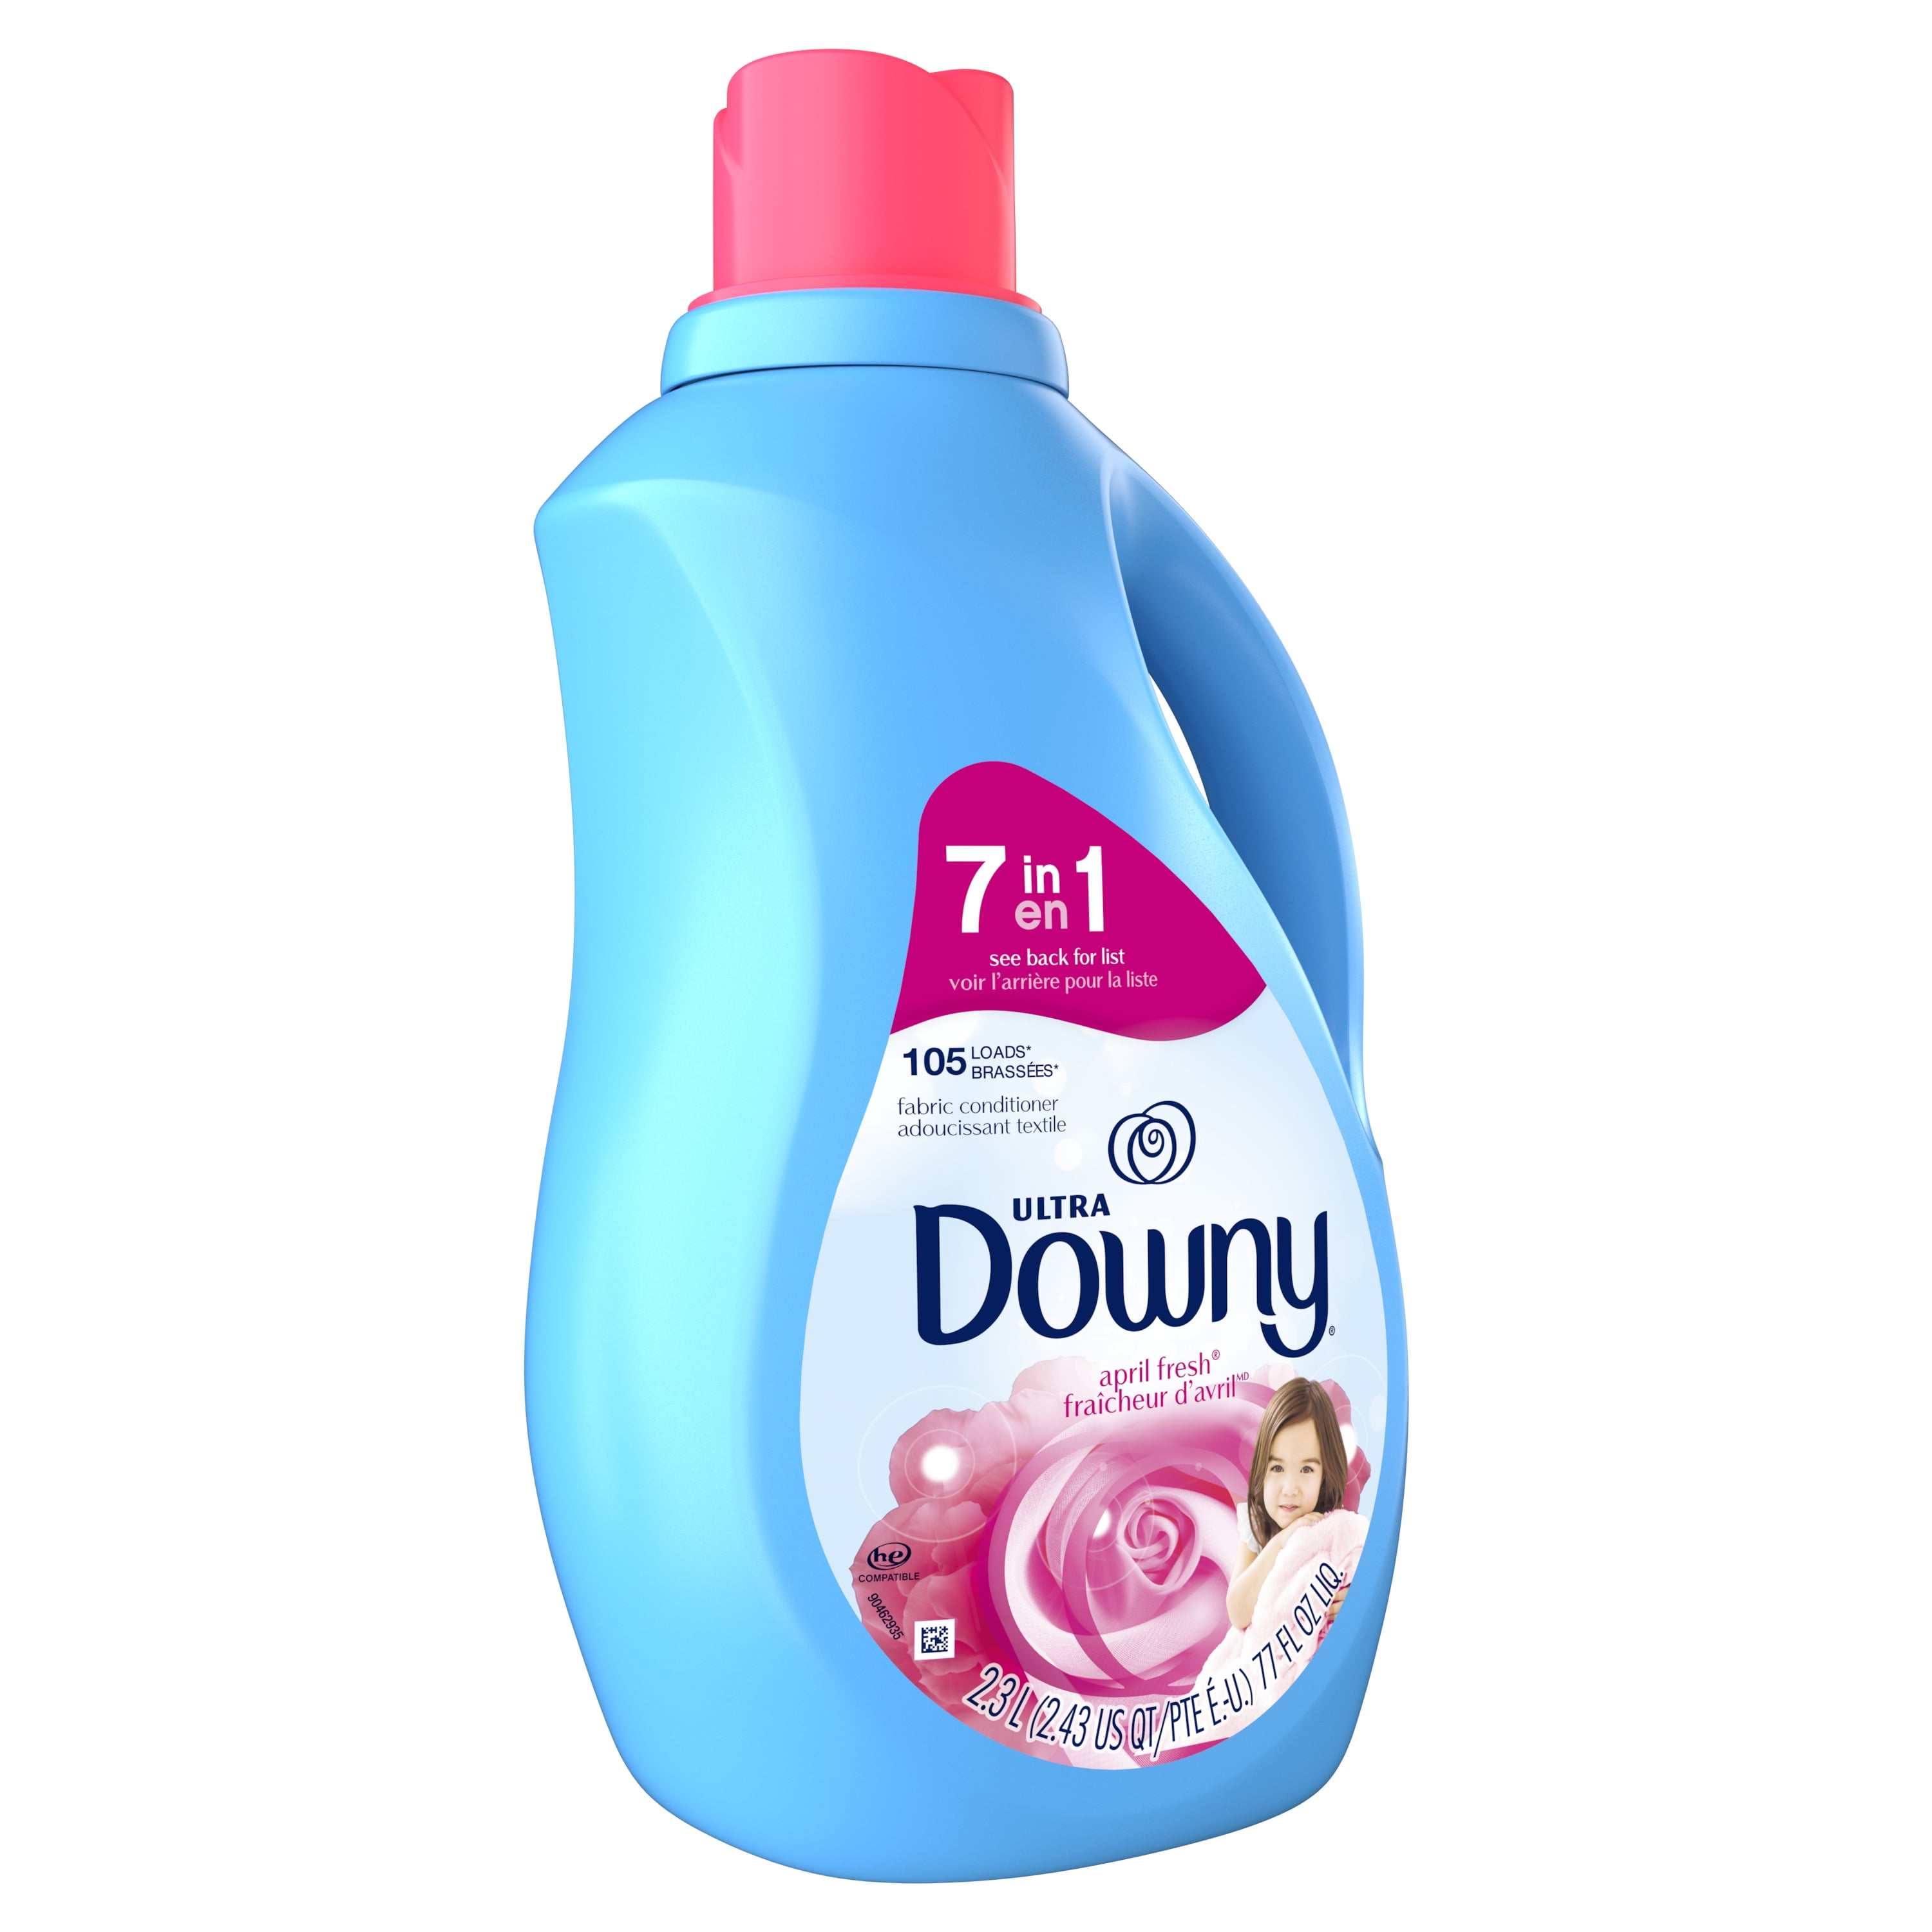 Downy Fabric Softener, April Fresh, 190 Loads as low as $9.08